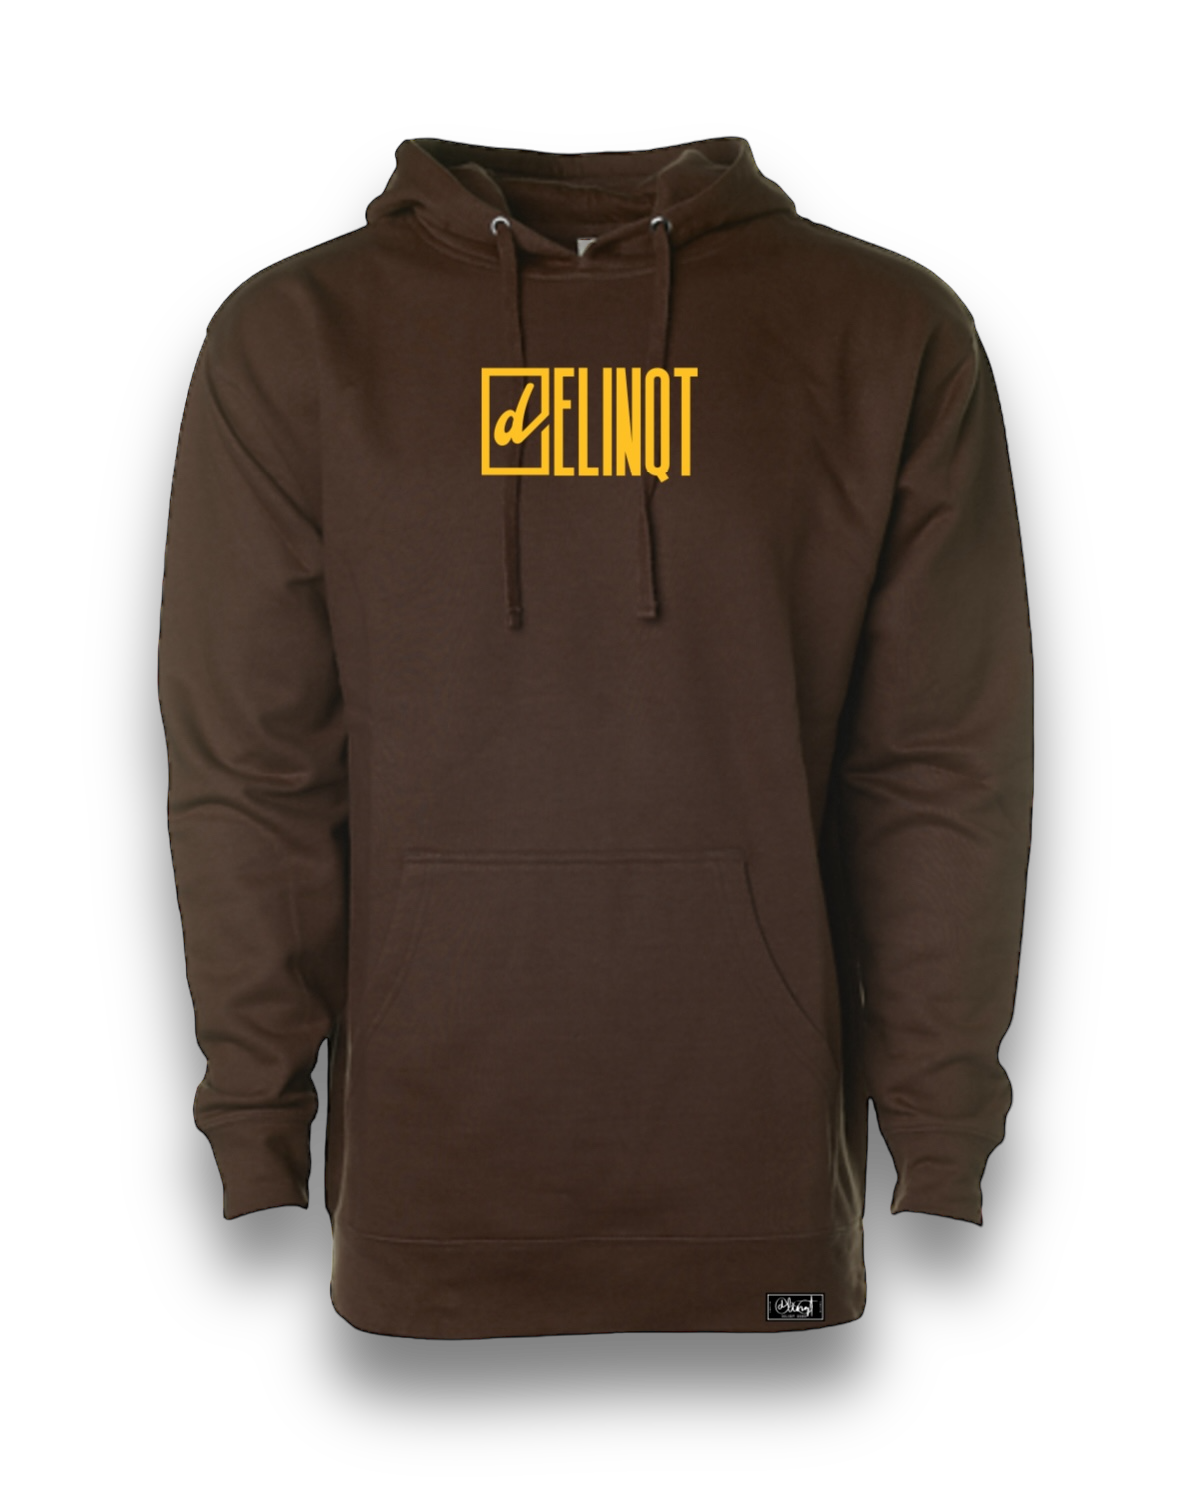 Delinqt Embroidered Hoodie (Brown)